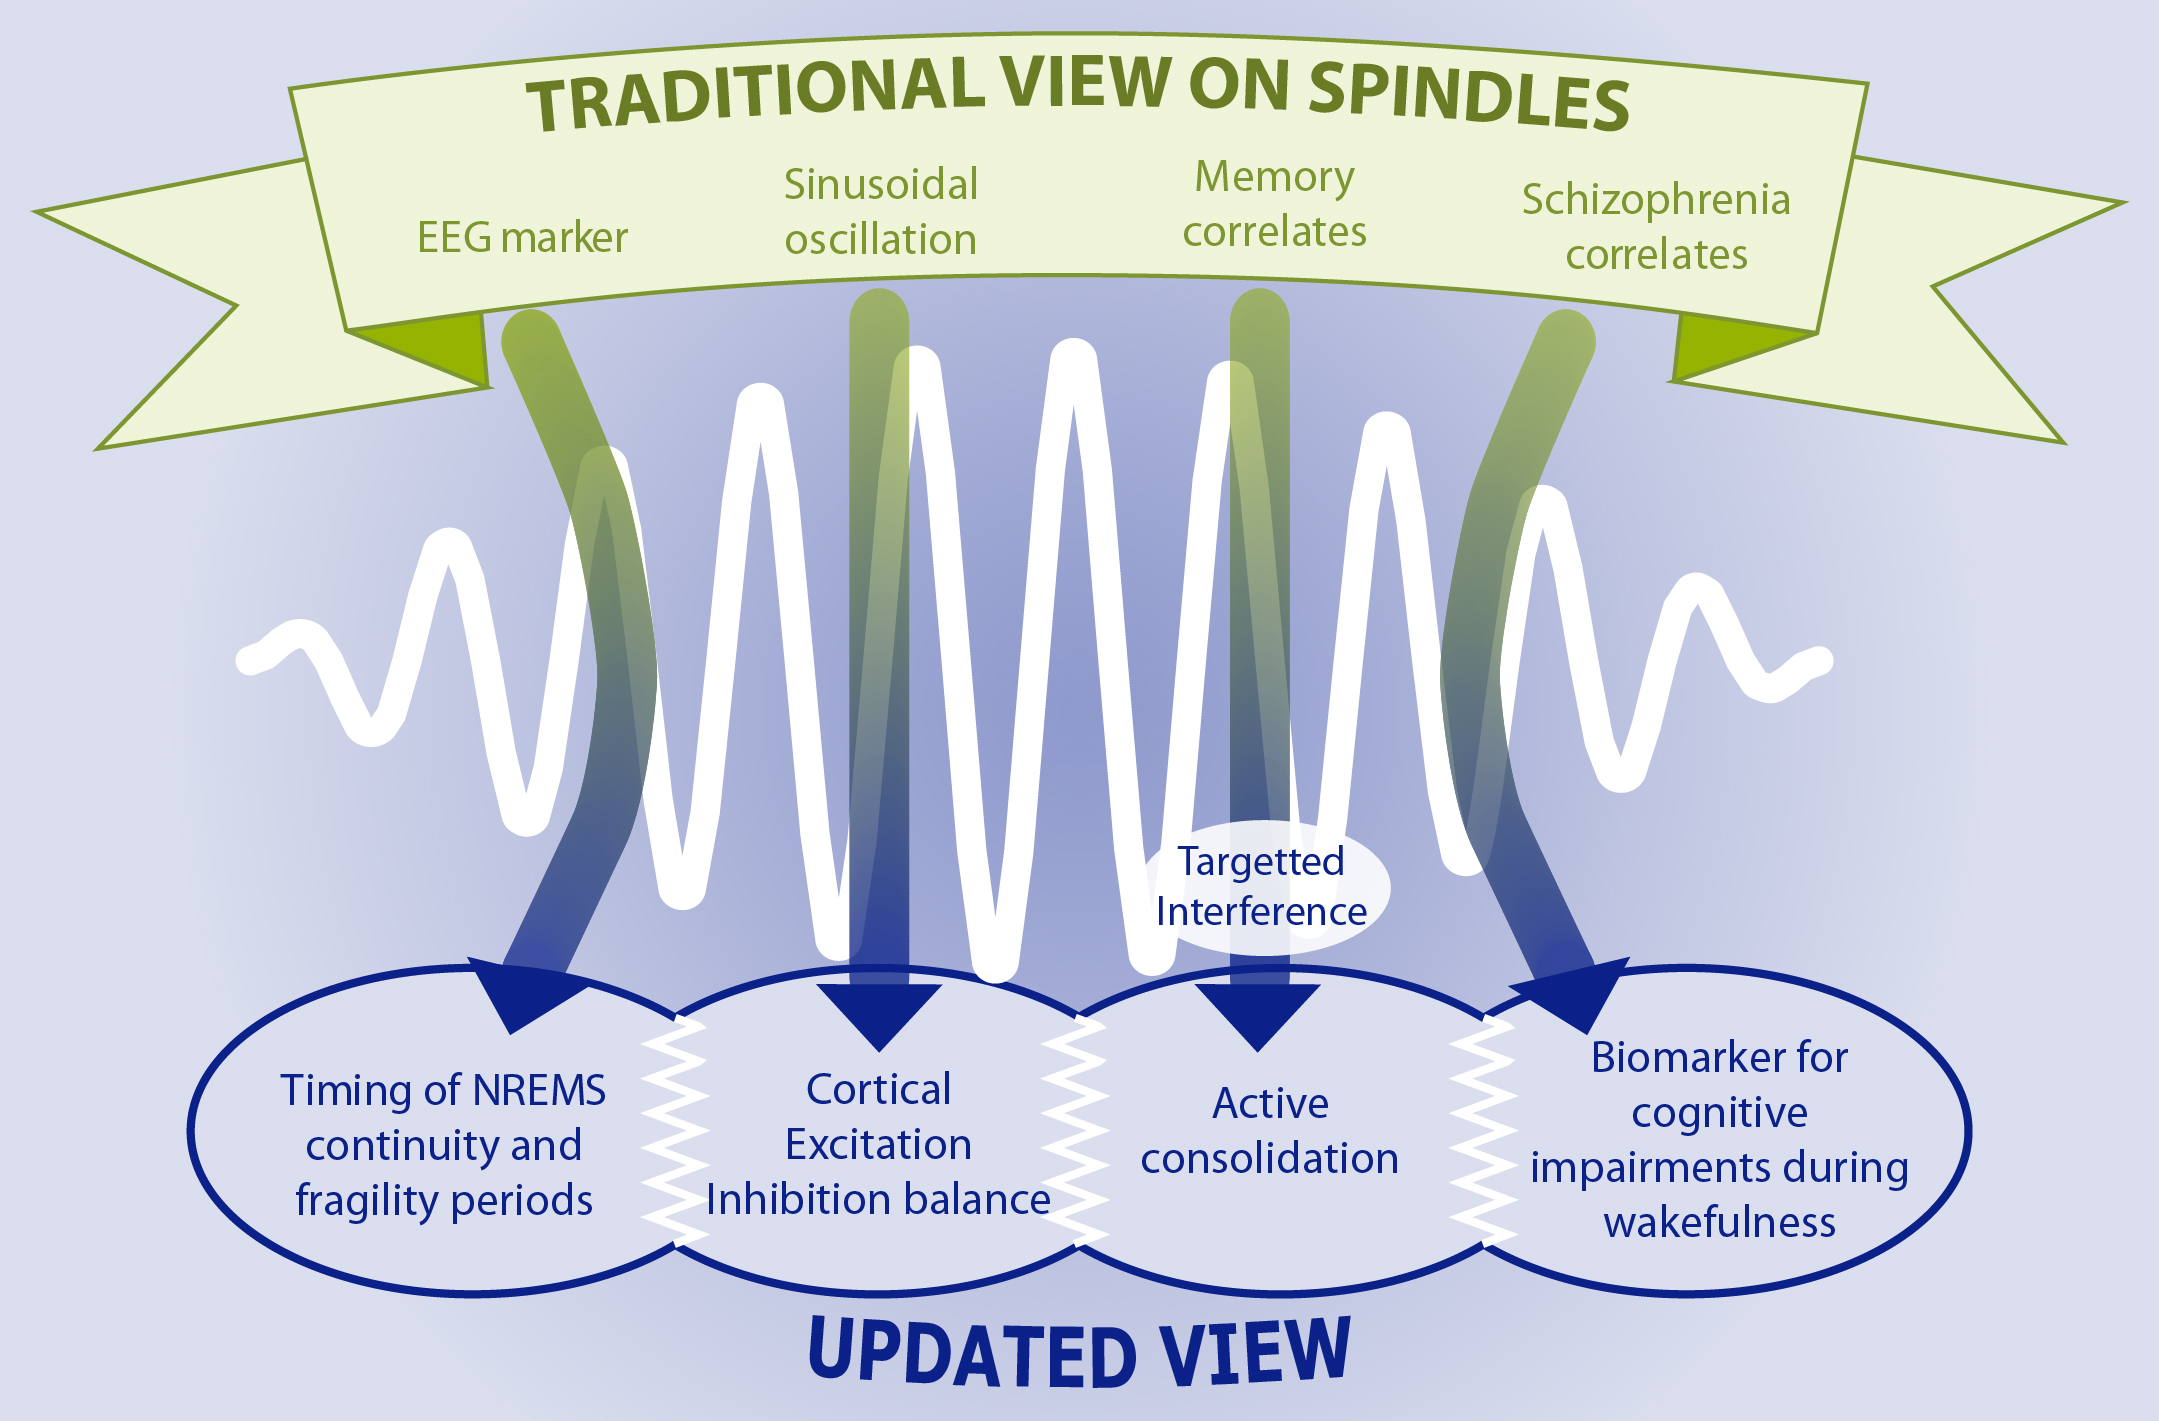 Sleep spindle review now published in Physiological Reviews